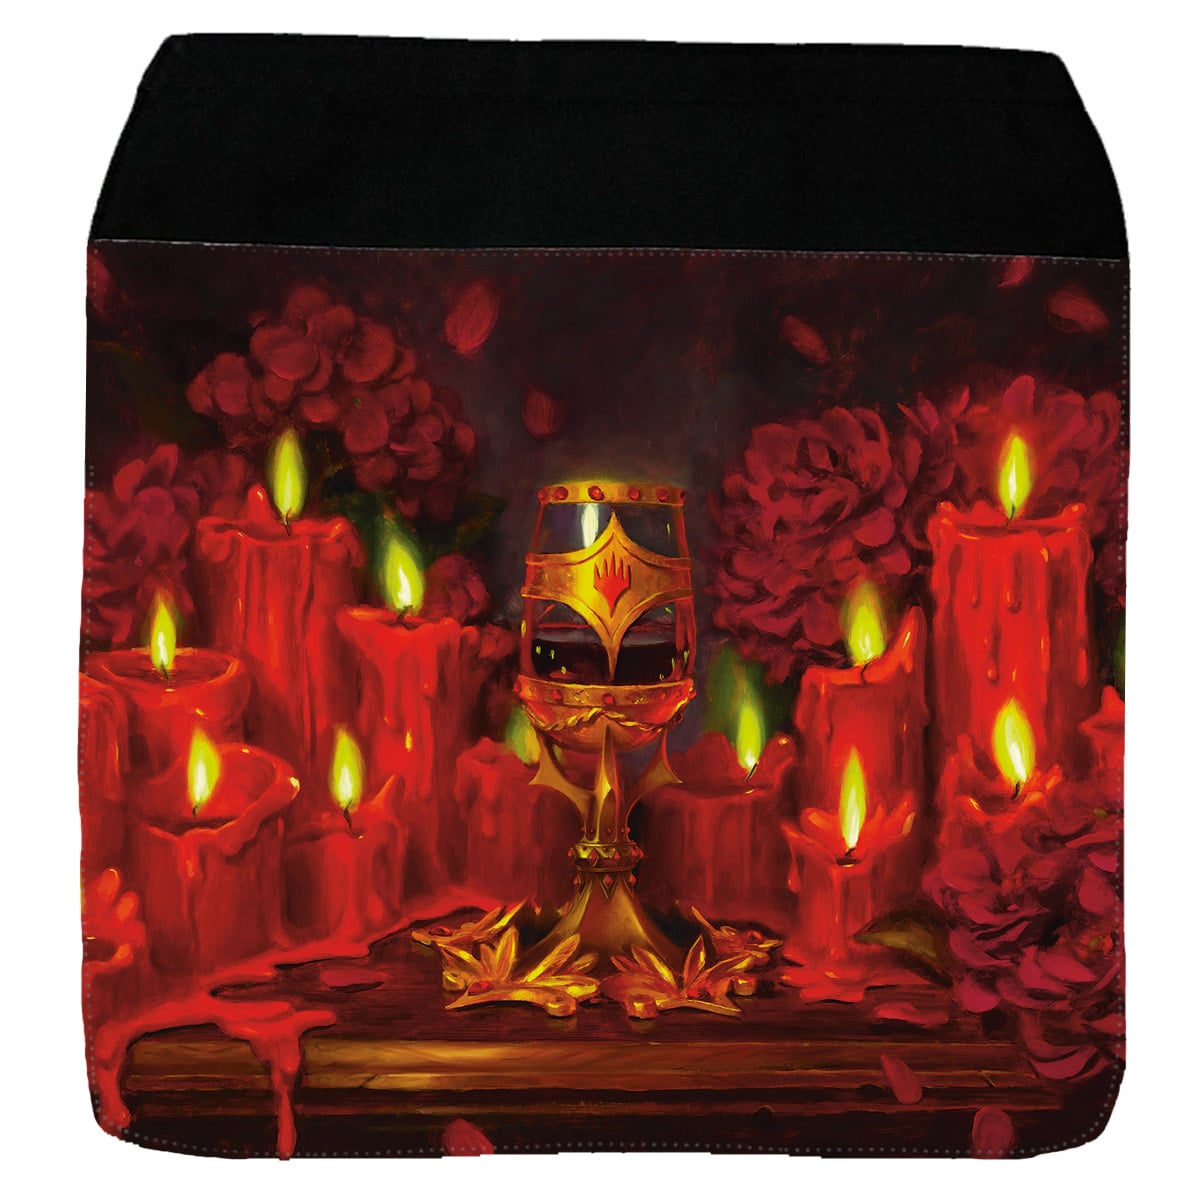 Innistrad: Crimson Vow Candle Messenger Bag Flap for Magic: The Gathering